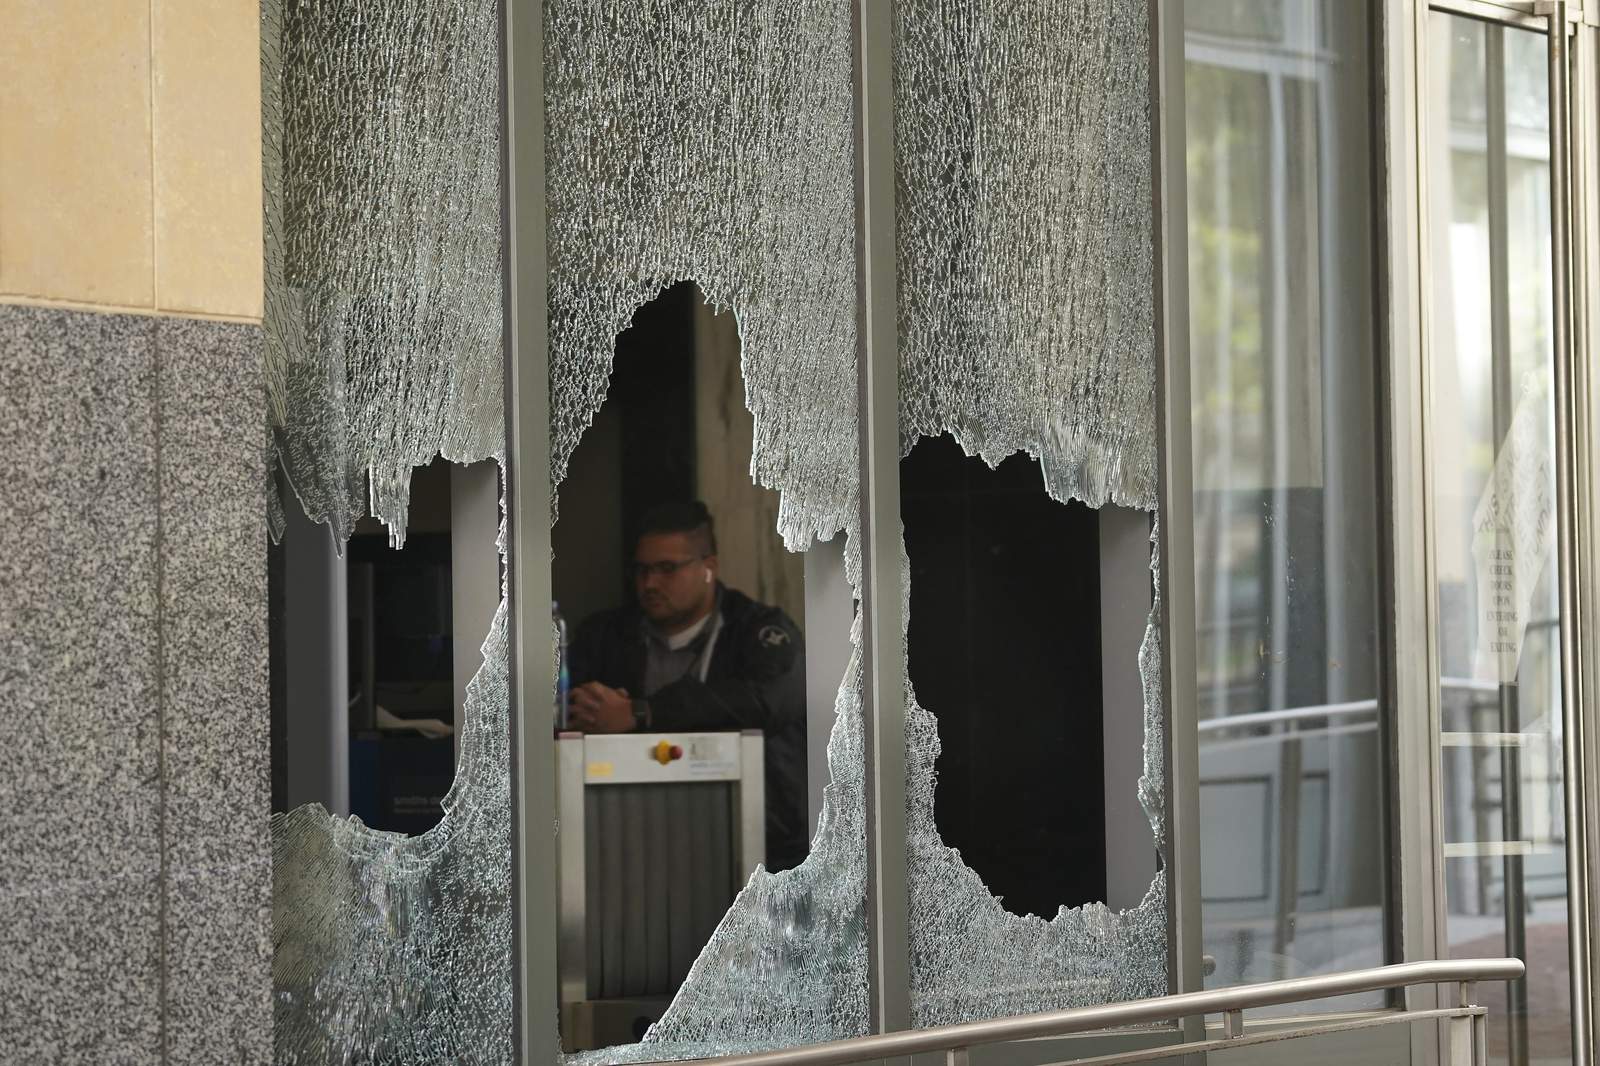 Oakland protesters set fire to courthouse, smash windows